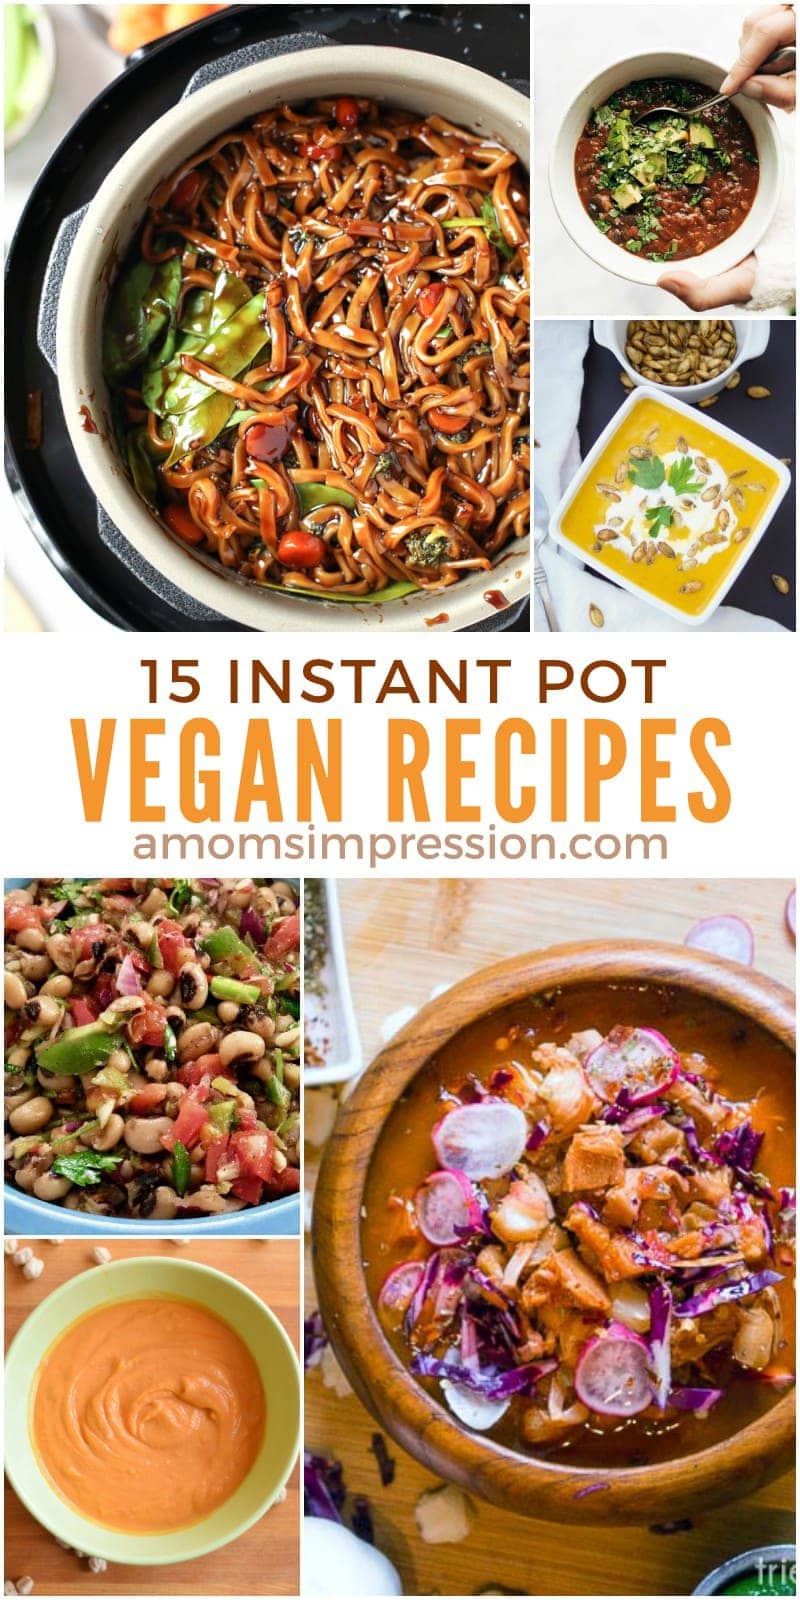 These Instant Pot Vegan recipes are healthy and full of flavor. These vegan meals can be made quick and easy, full of vegetables and perfect for families. 